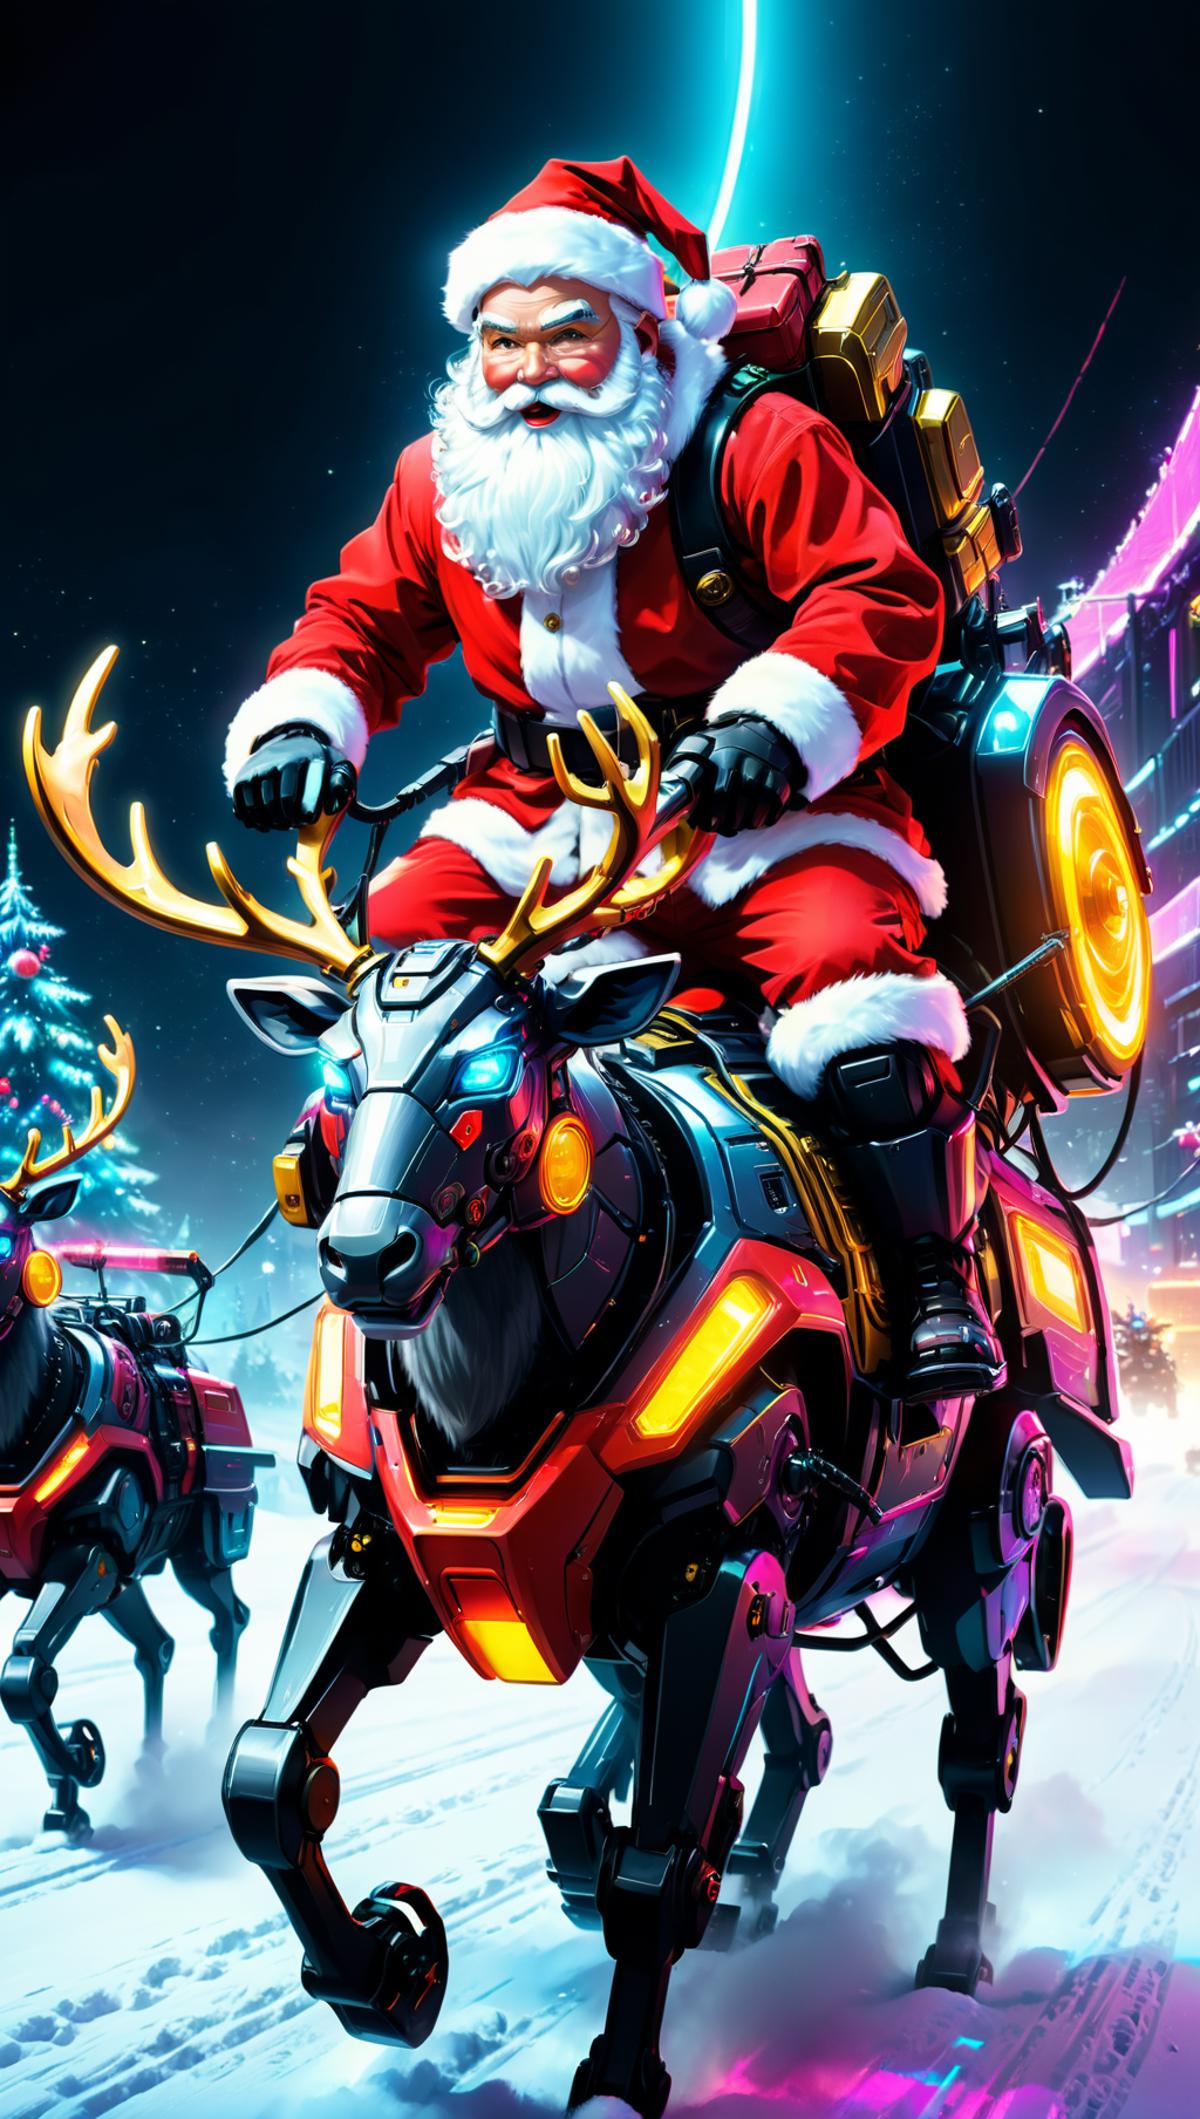 A Christmas-themed illustration of Santa Claus riding a robot deer with orange wheels, possibly a horse or a mechanical reindeer.